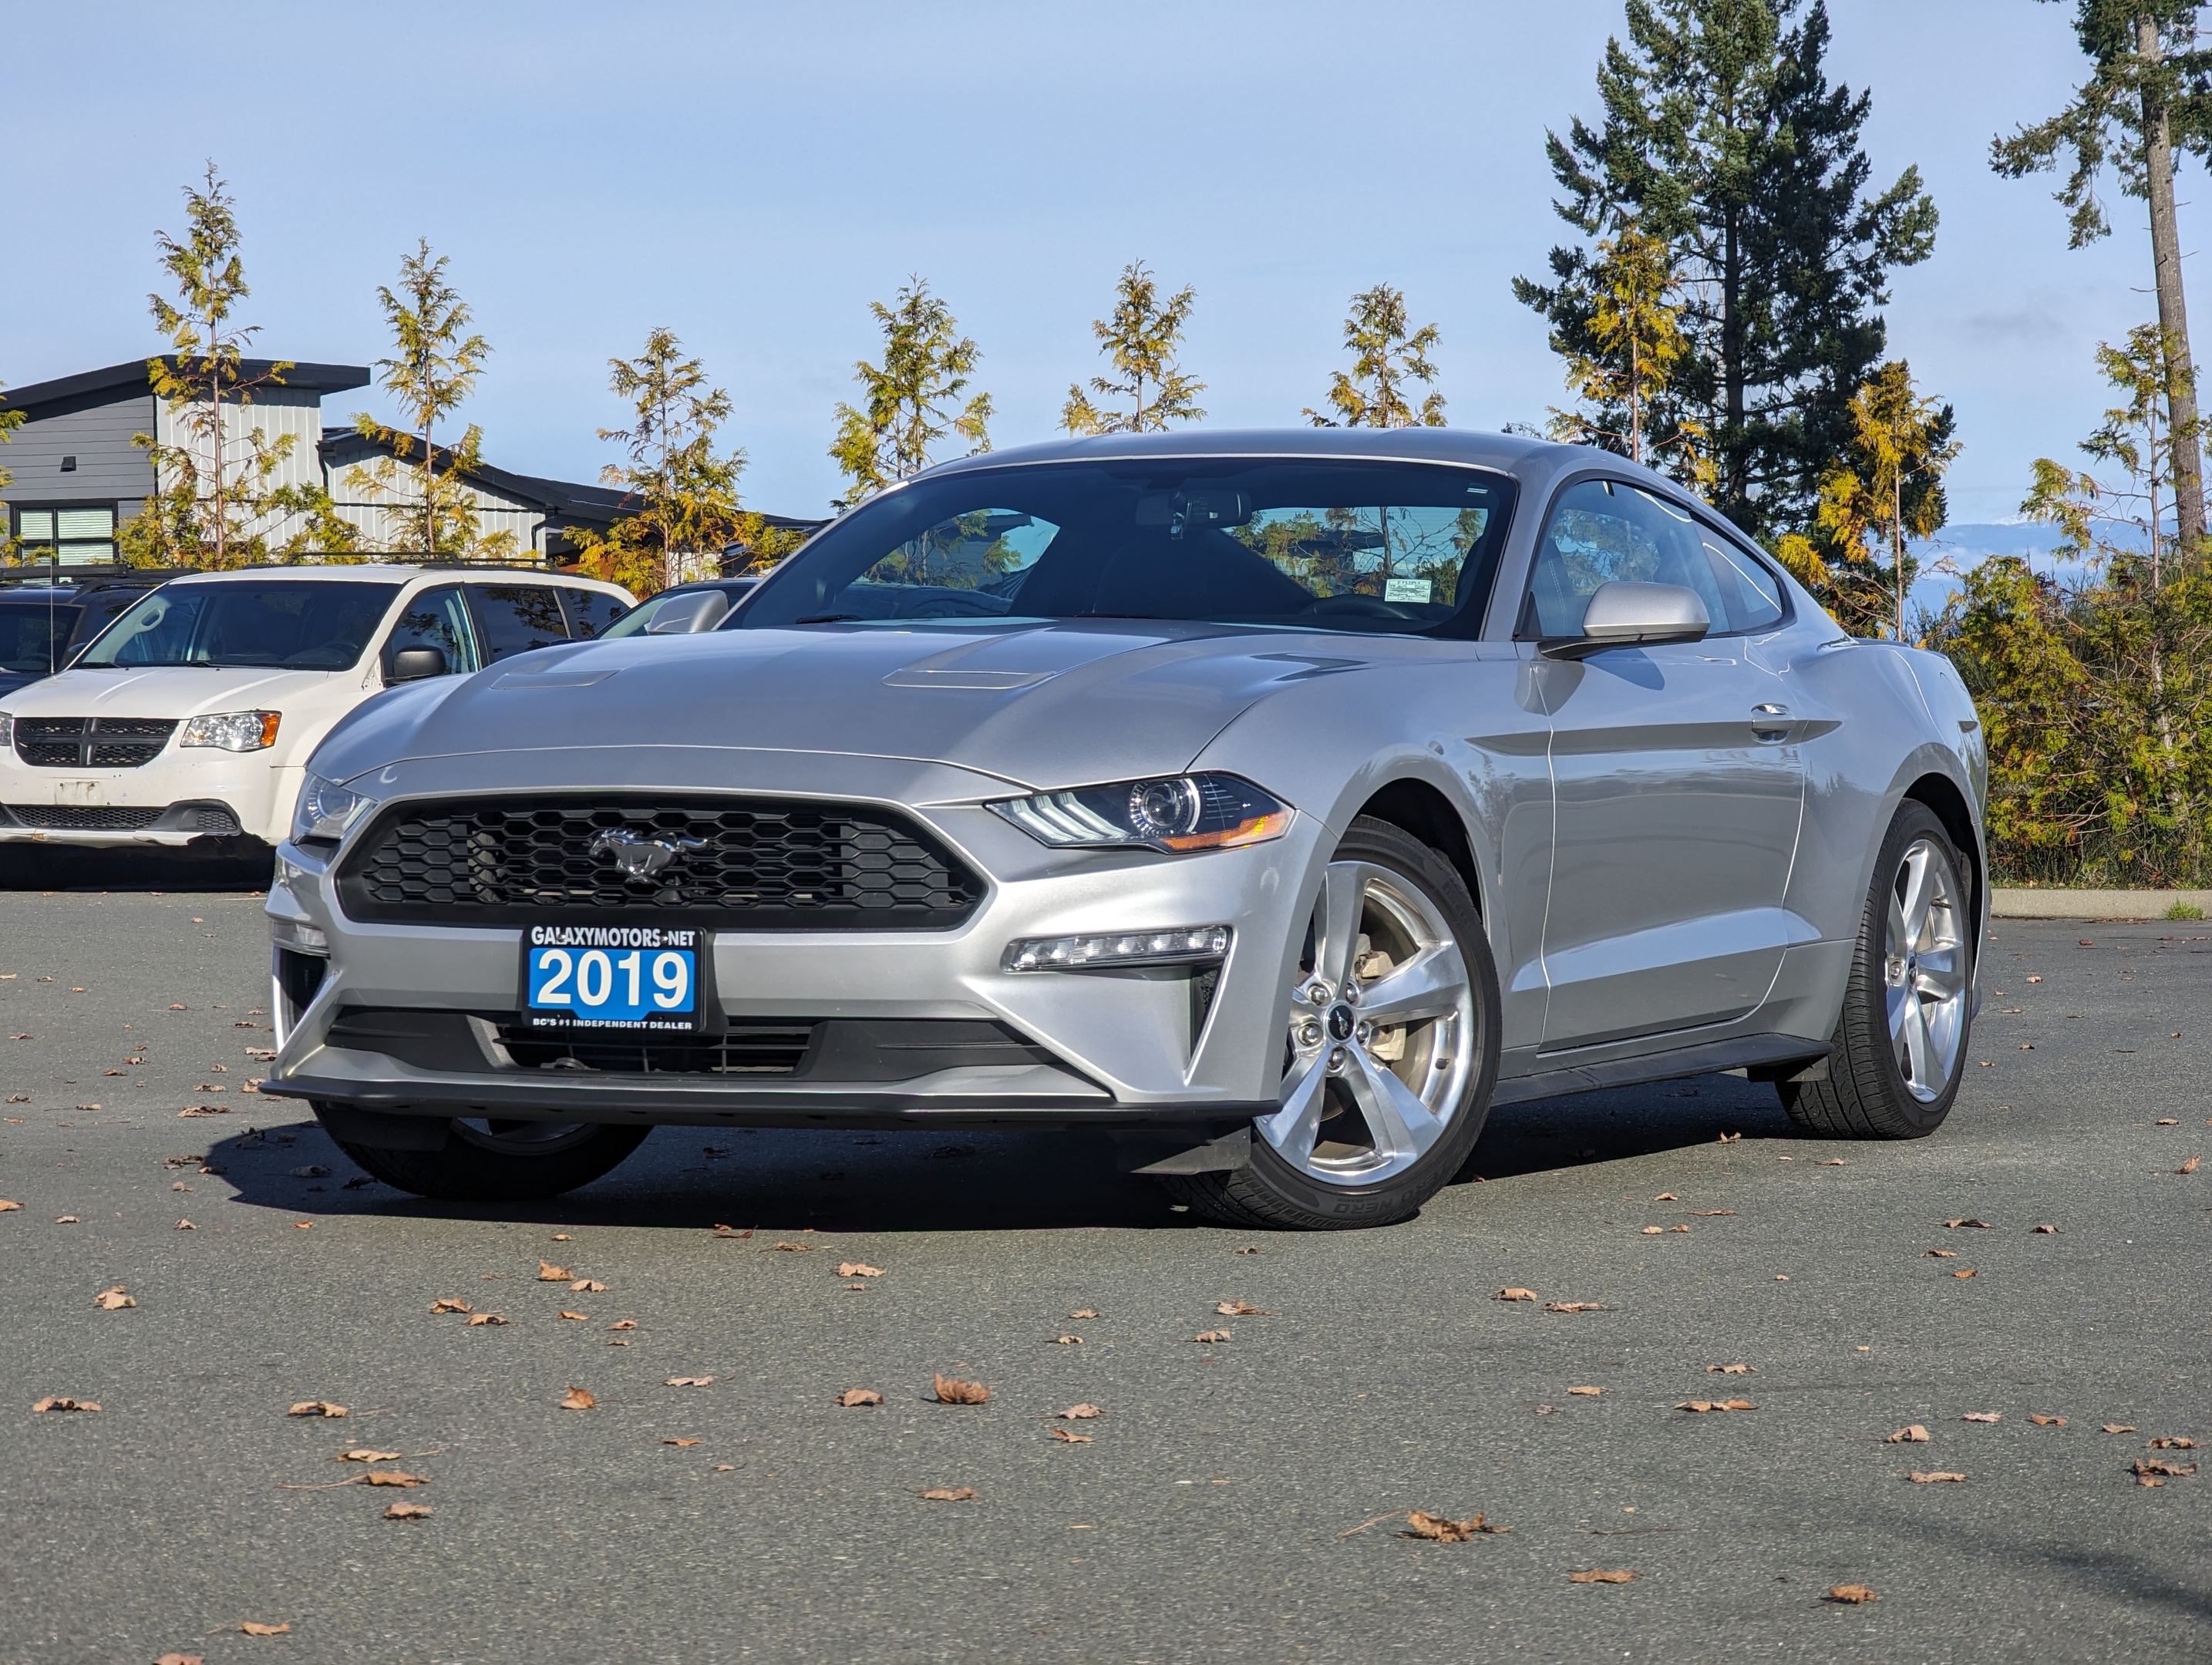 2019 Ford Mustang EcoBoost - No Accidents, Navigation, Automatic